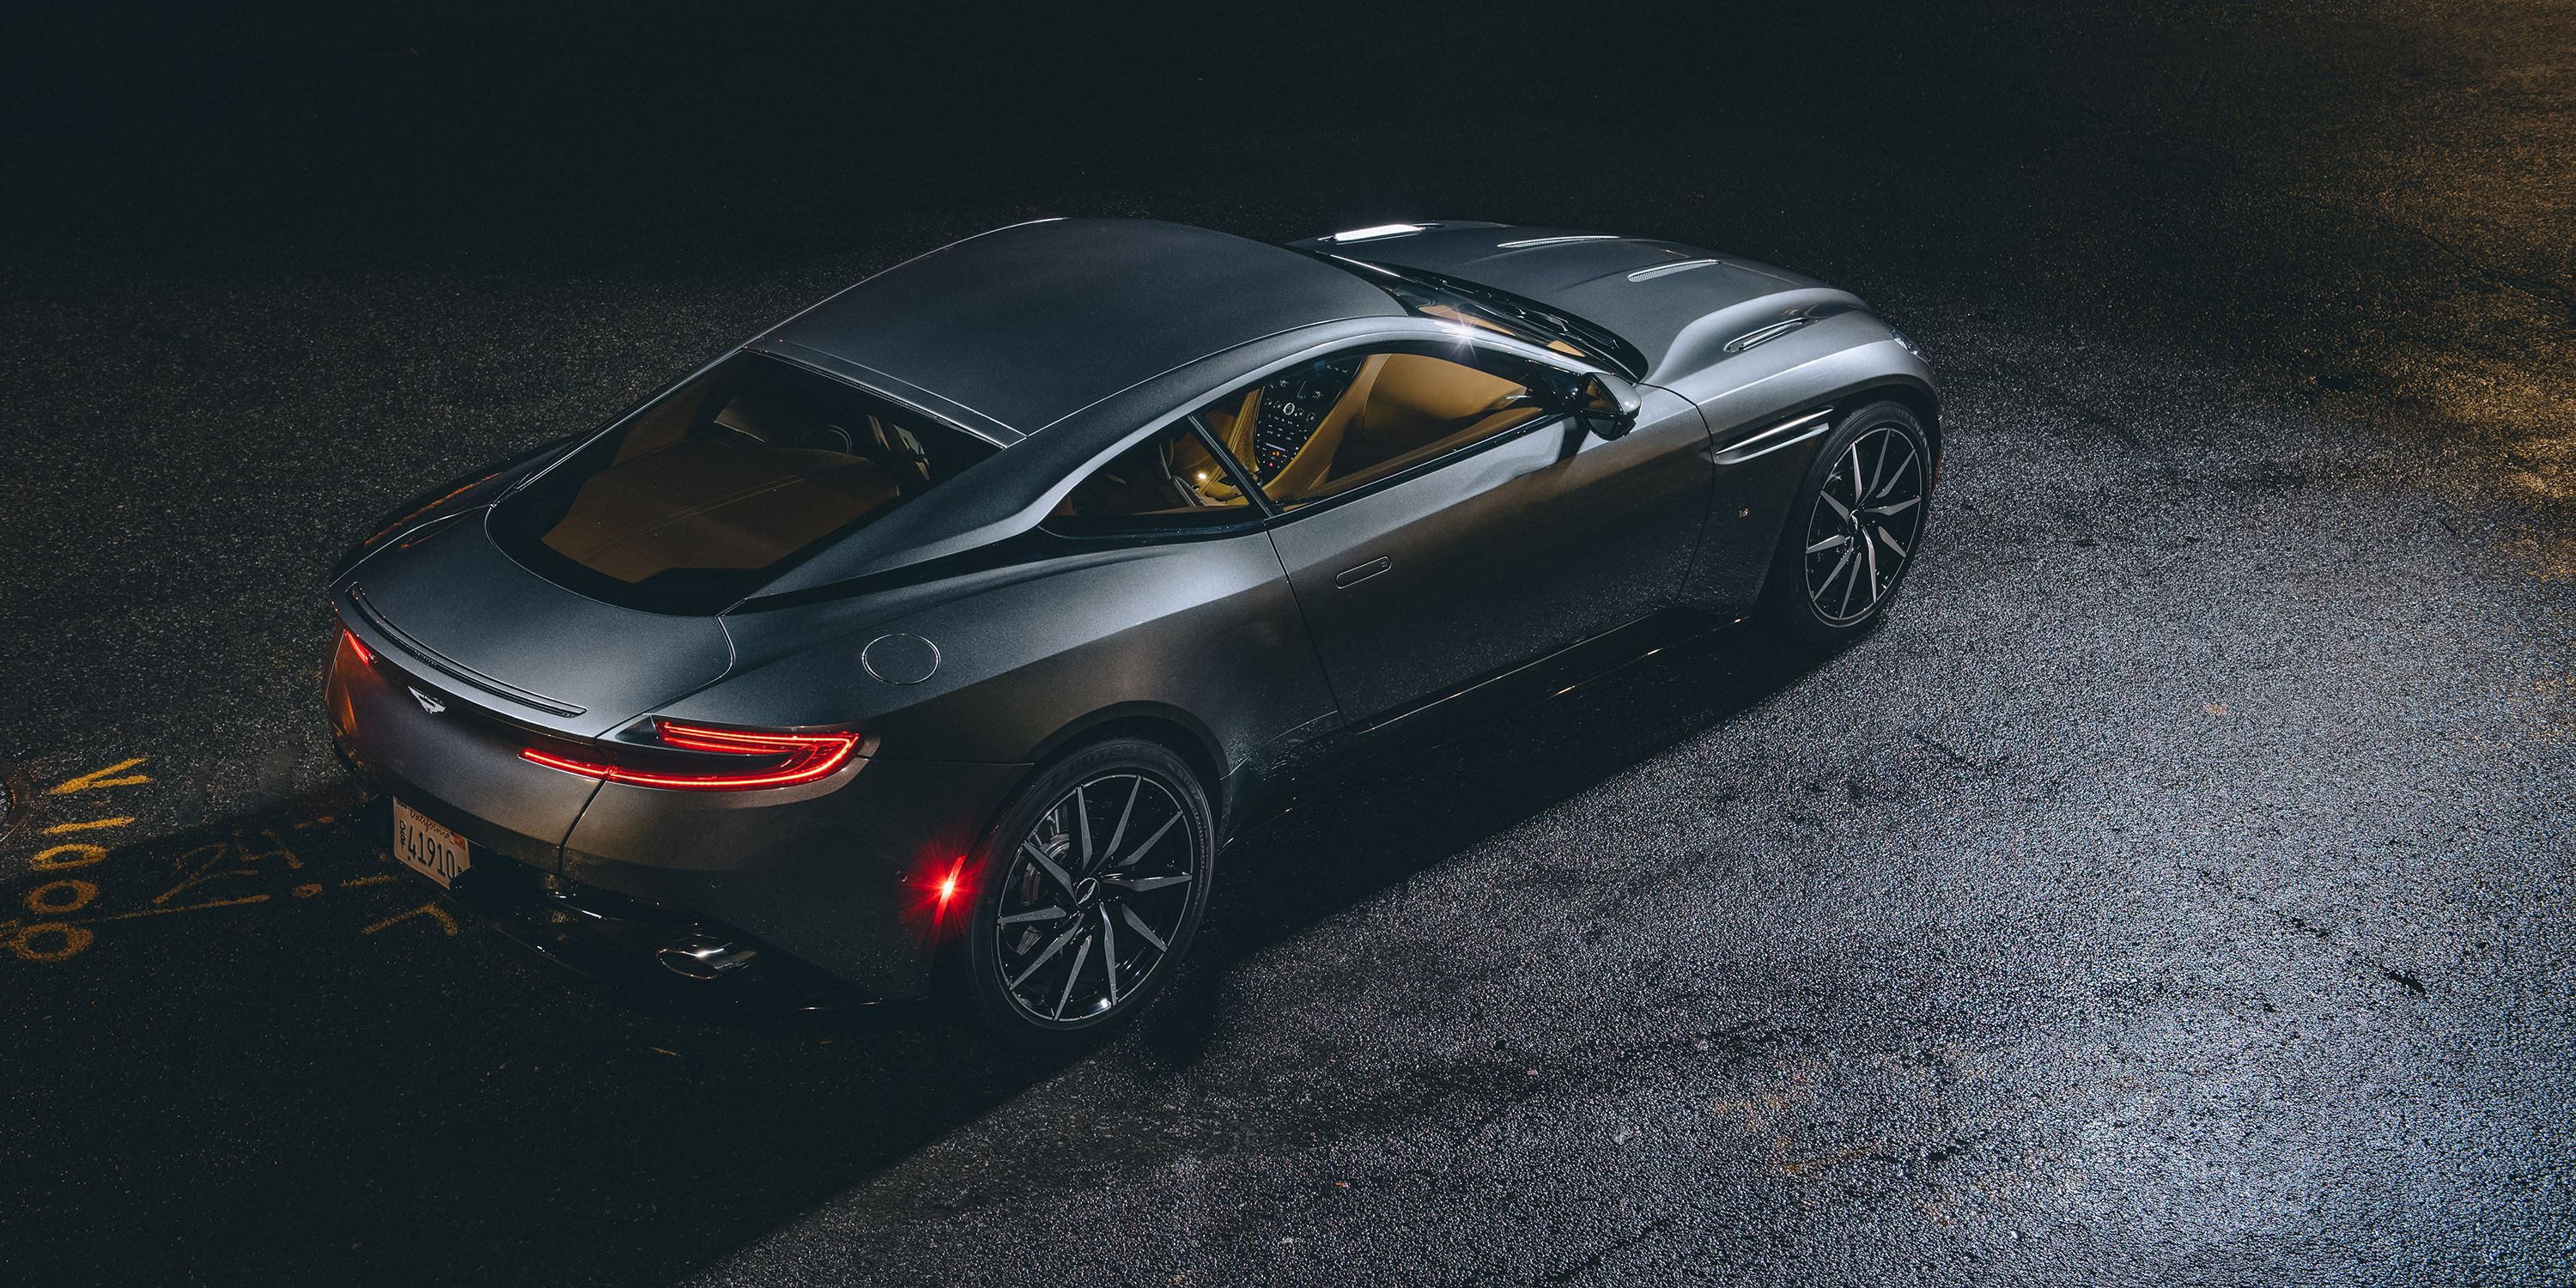 The Db11 V12 Gives Aston Martin An Incredible Platform To Build On